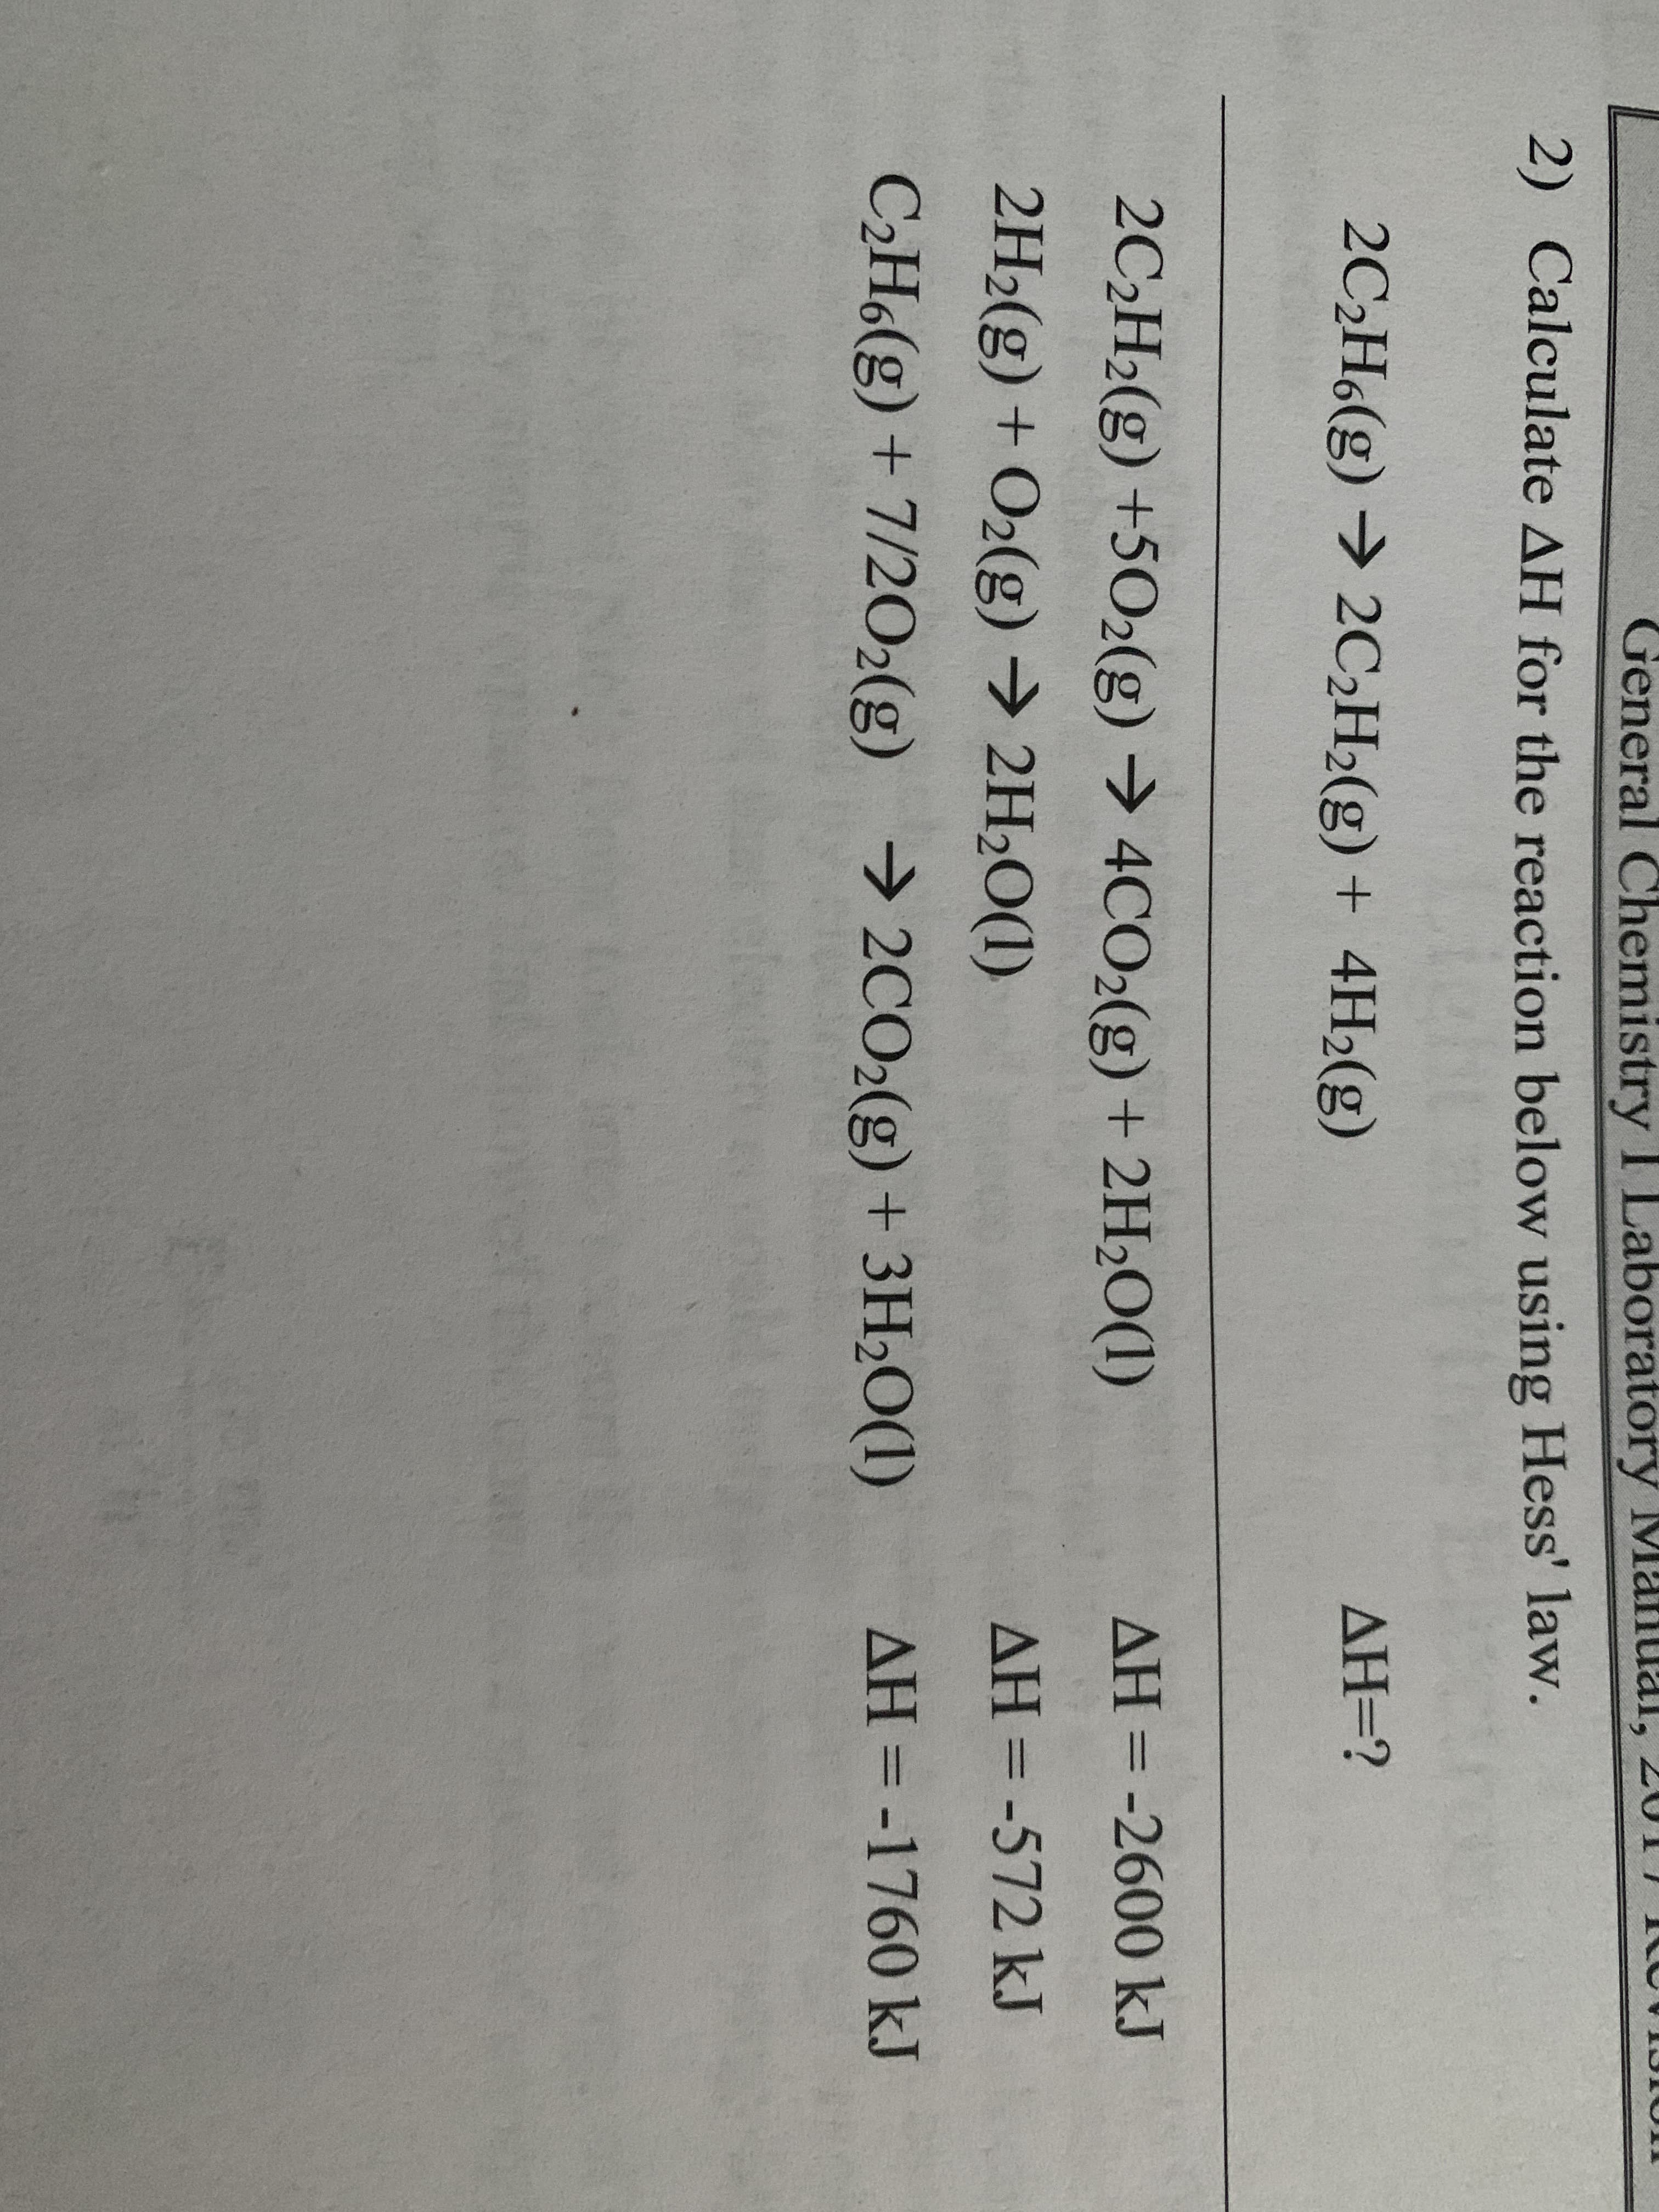 General Chemistry I Laboratory Manual, 201
2) Calculate AH for the reaction below using Hess' law.
2C2H6(g) 2C2H2(g) + 4H2(g)
AH=?
2C2H2(g) +502(g)> 4CO2(g) + 2H20(1)
AH -2600 kJ
2H2(g) + O2(g)
2H20(1)
AH -572 kJ
C2H6(g) +7/2O2(g)
2CO2(g) + 3H2O(I)
AH =-1760 kJ
